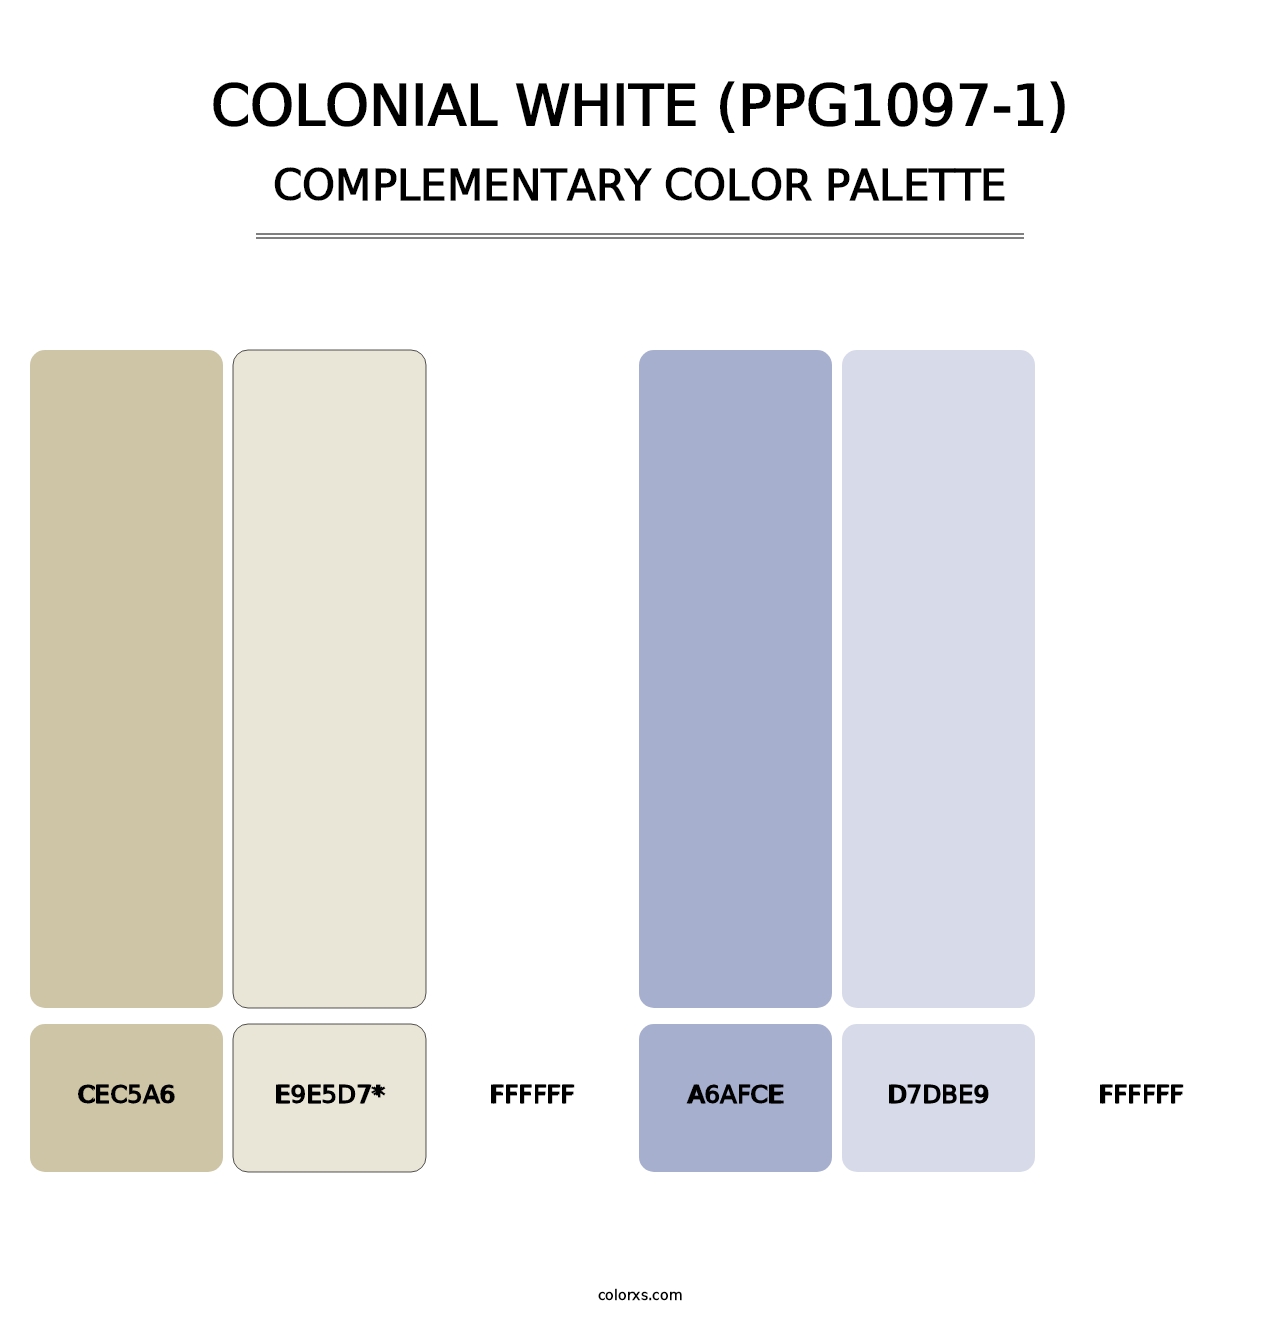 Colonial White (PPG1097-1) - Complementary Color Palette